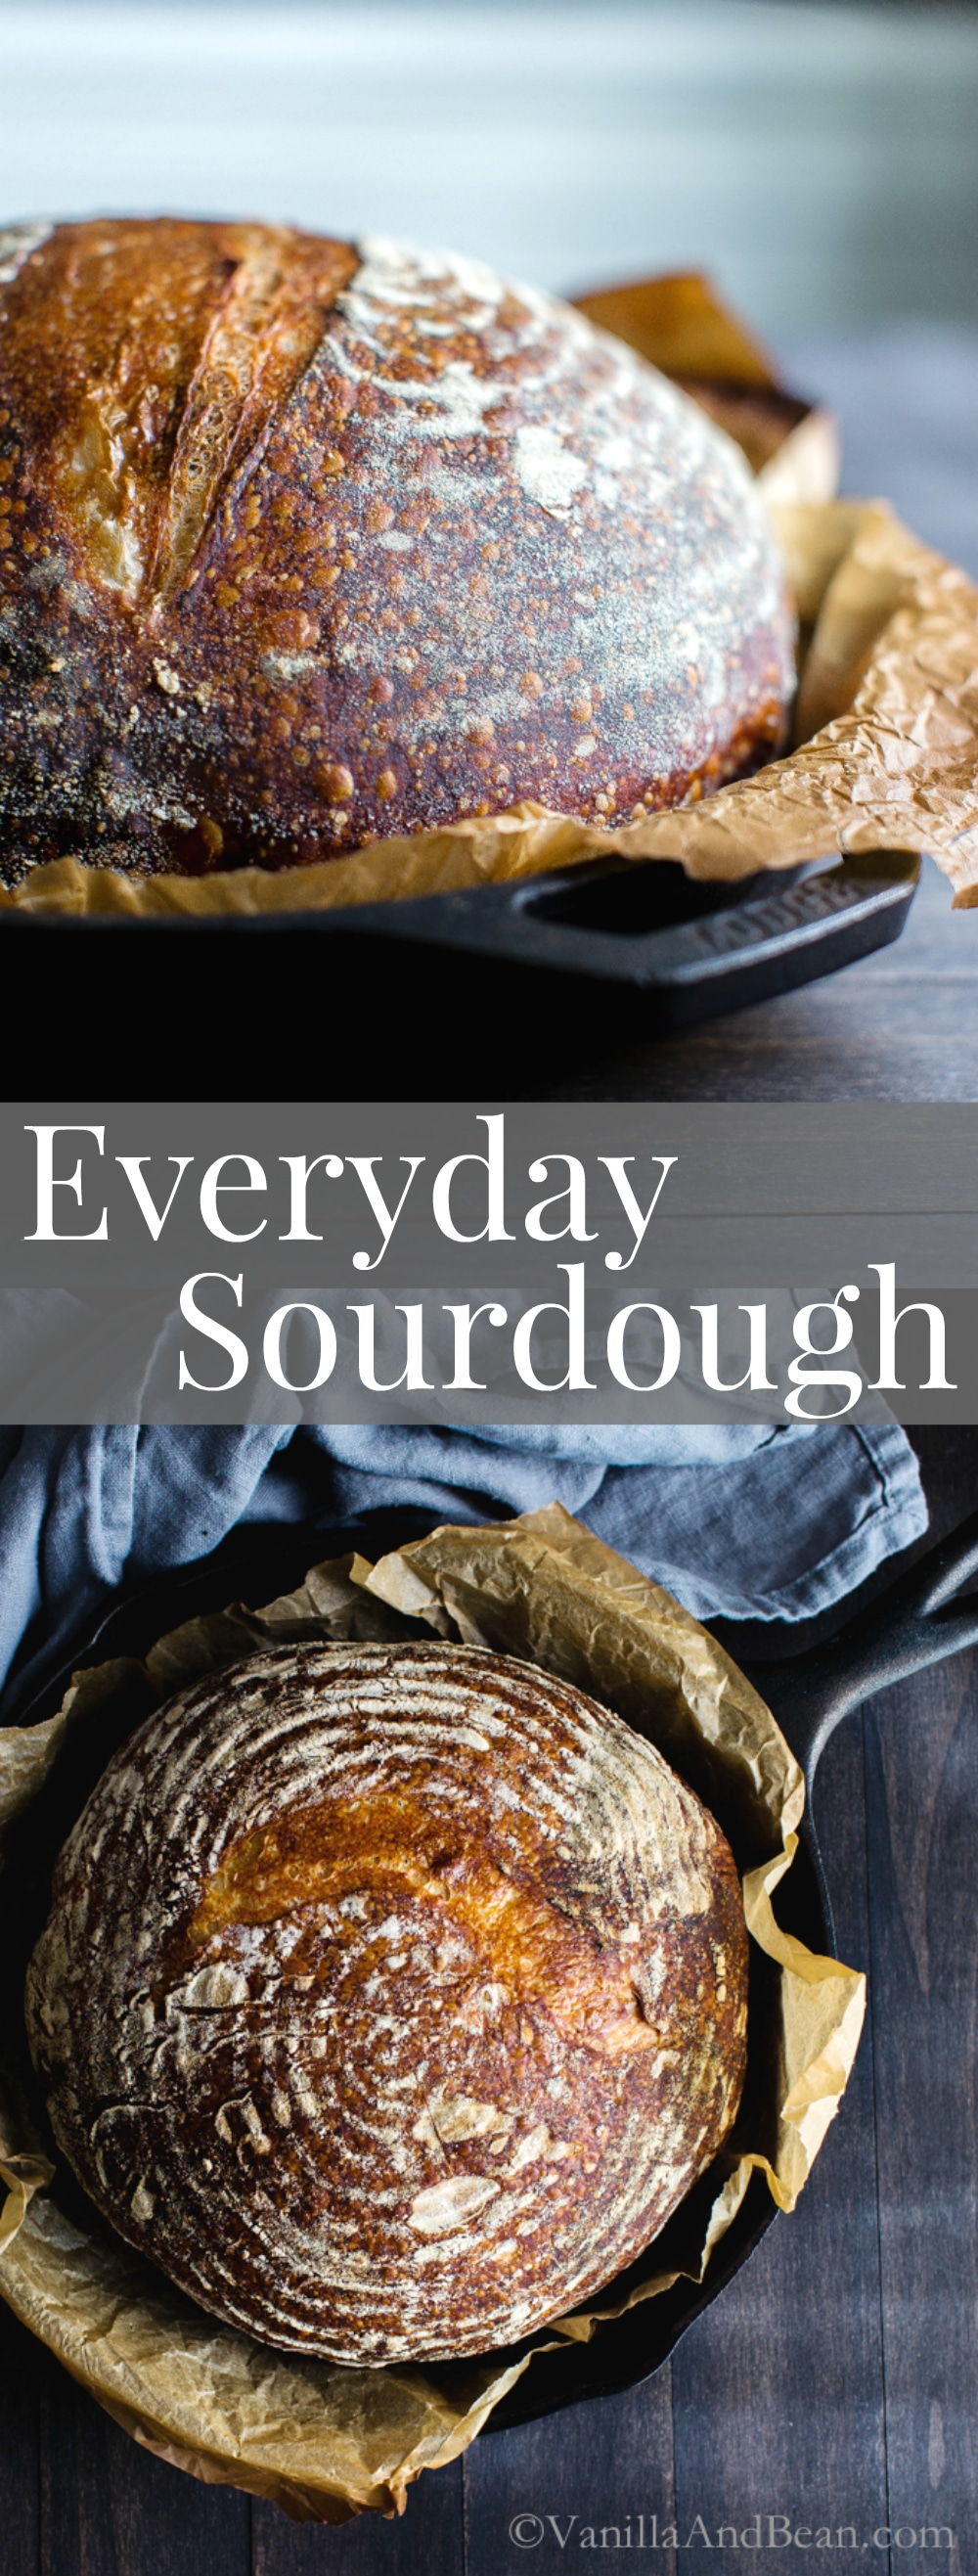 Henry's Sourdough Bread-Making Process: A Straightforward Guide - Baking  Great Bread at Home Blog